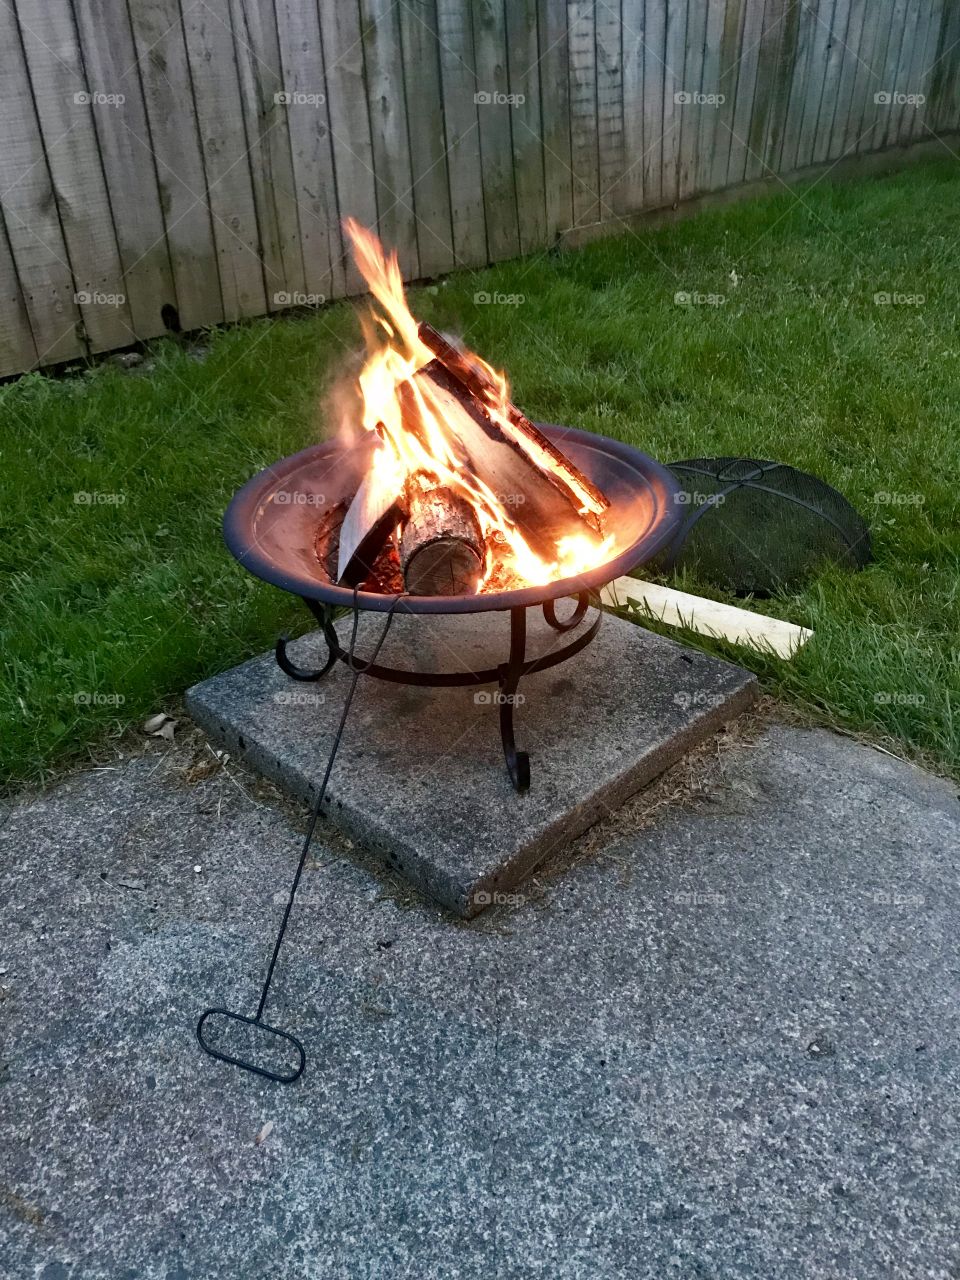 Fire pit in the back yard w flames and poking stick